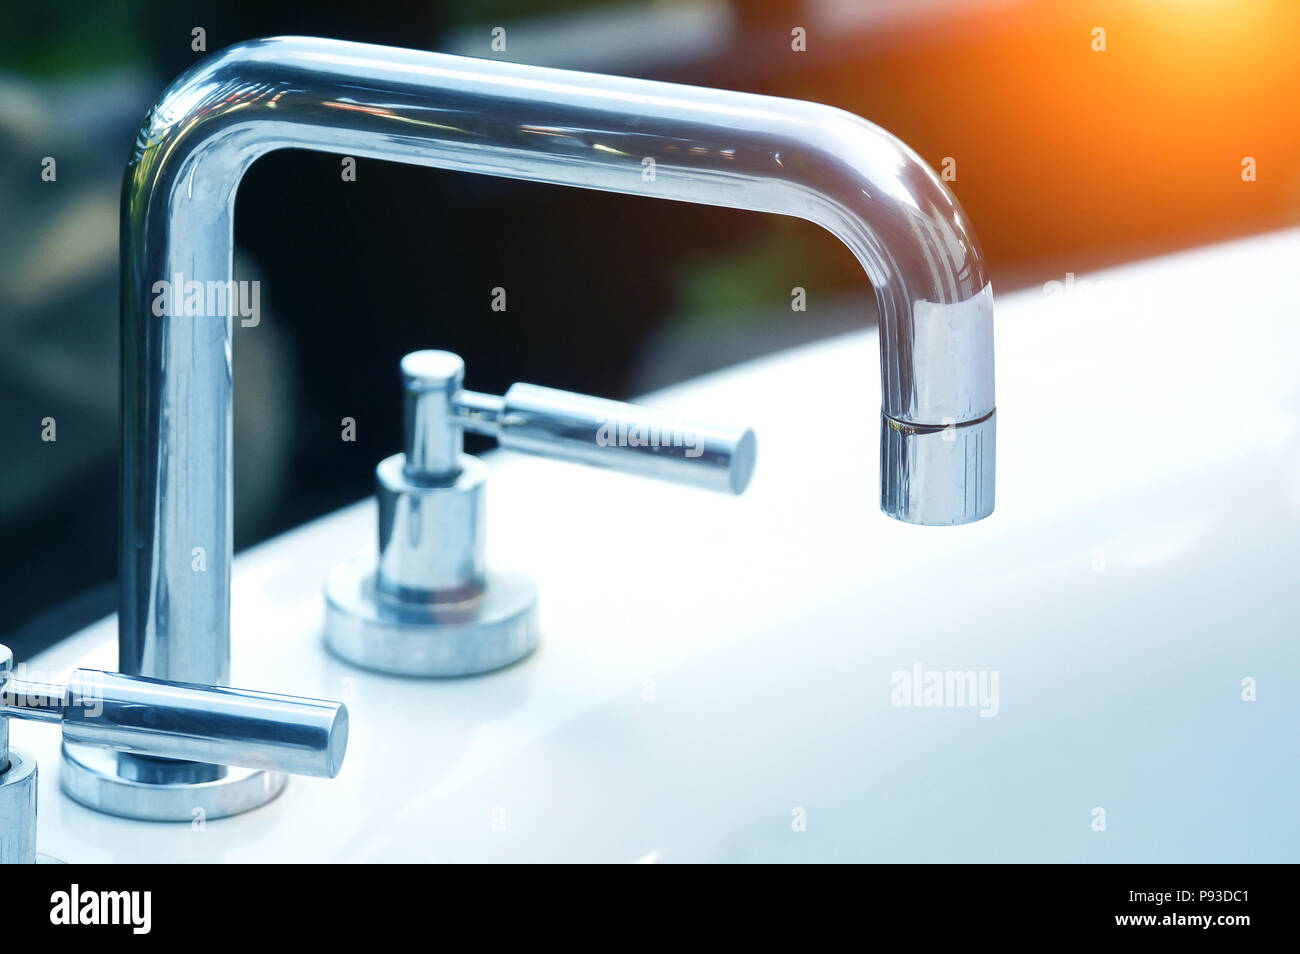 high spout faucet in front on sink Stock Photo - Alamy